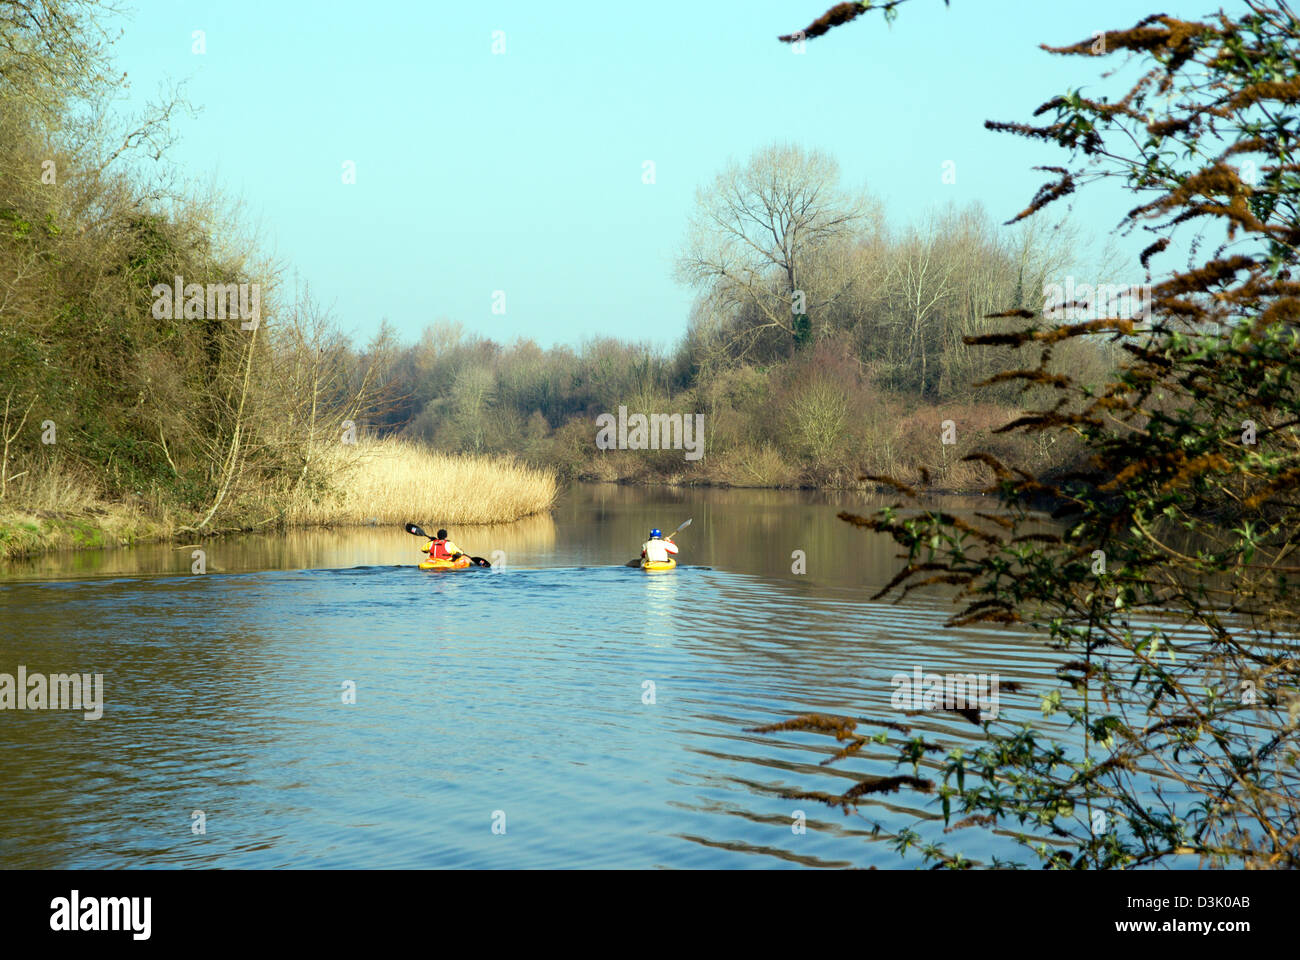 two kayaks on River Ely from the Ely Trail Footpath, Cardiff, South Wales. Stock Photo